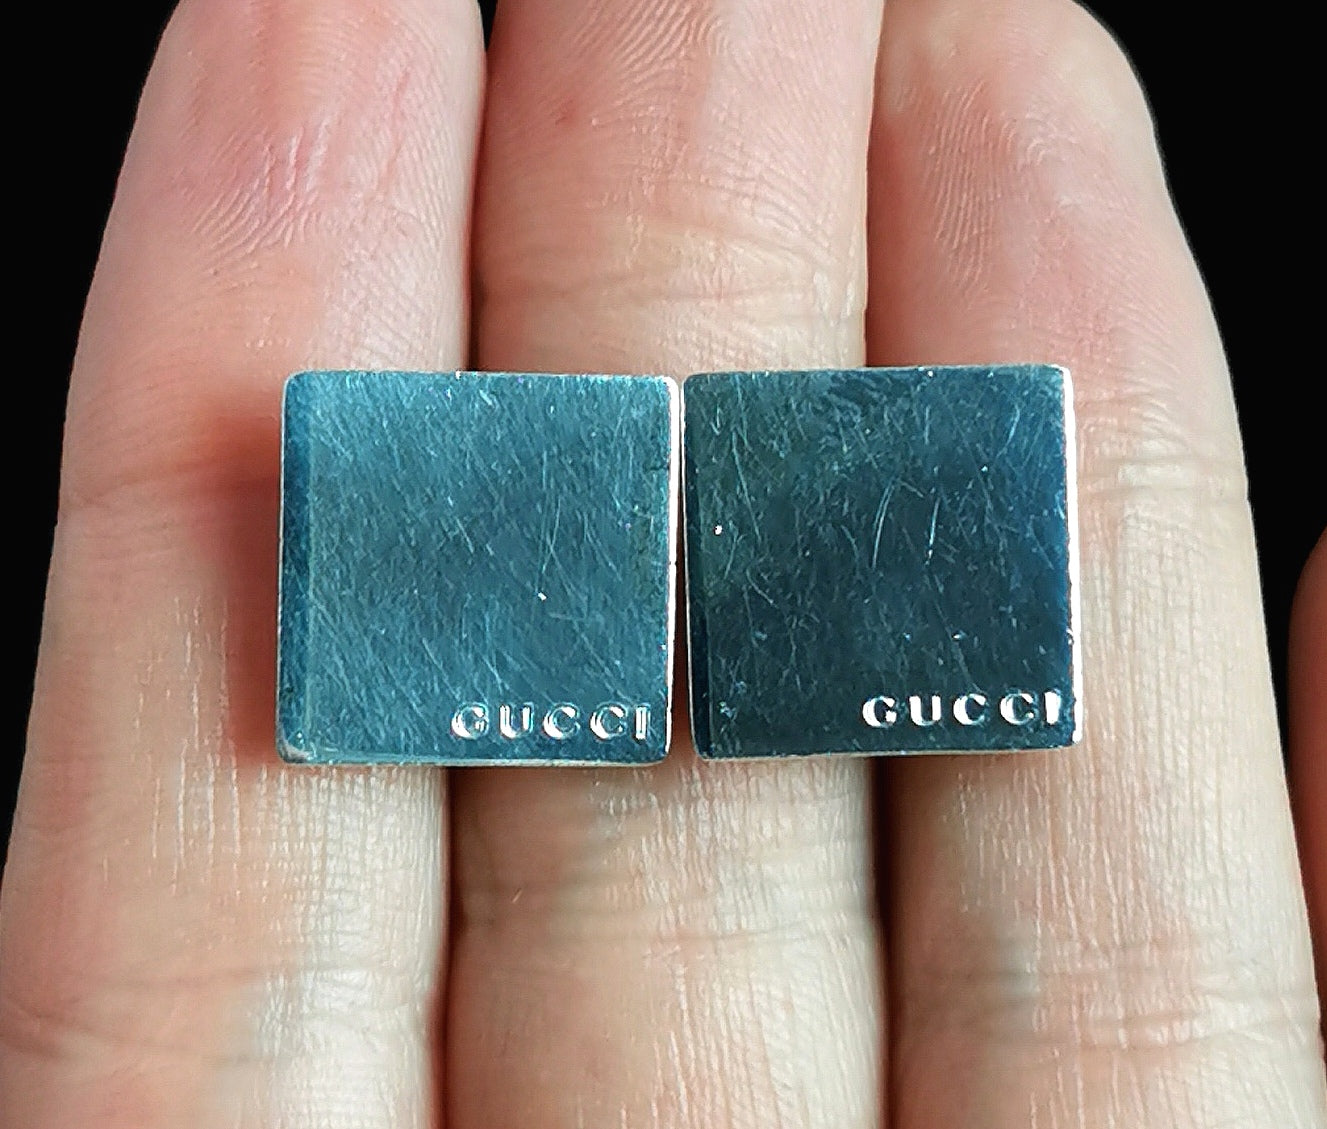 Vintage sterling silver Gucci cufflinks, square